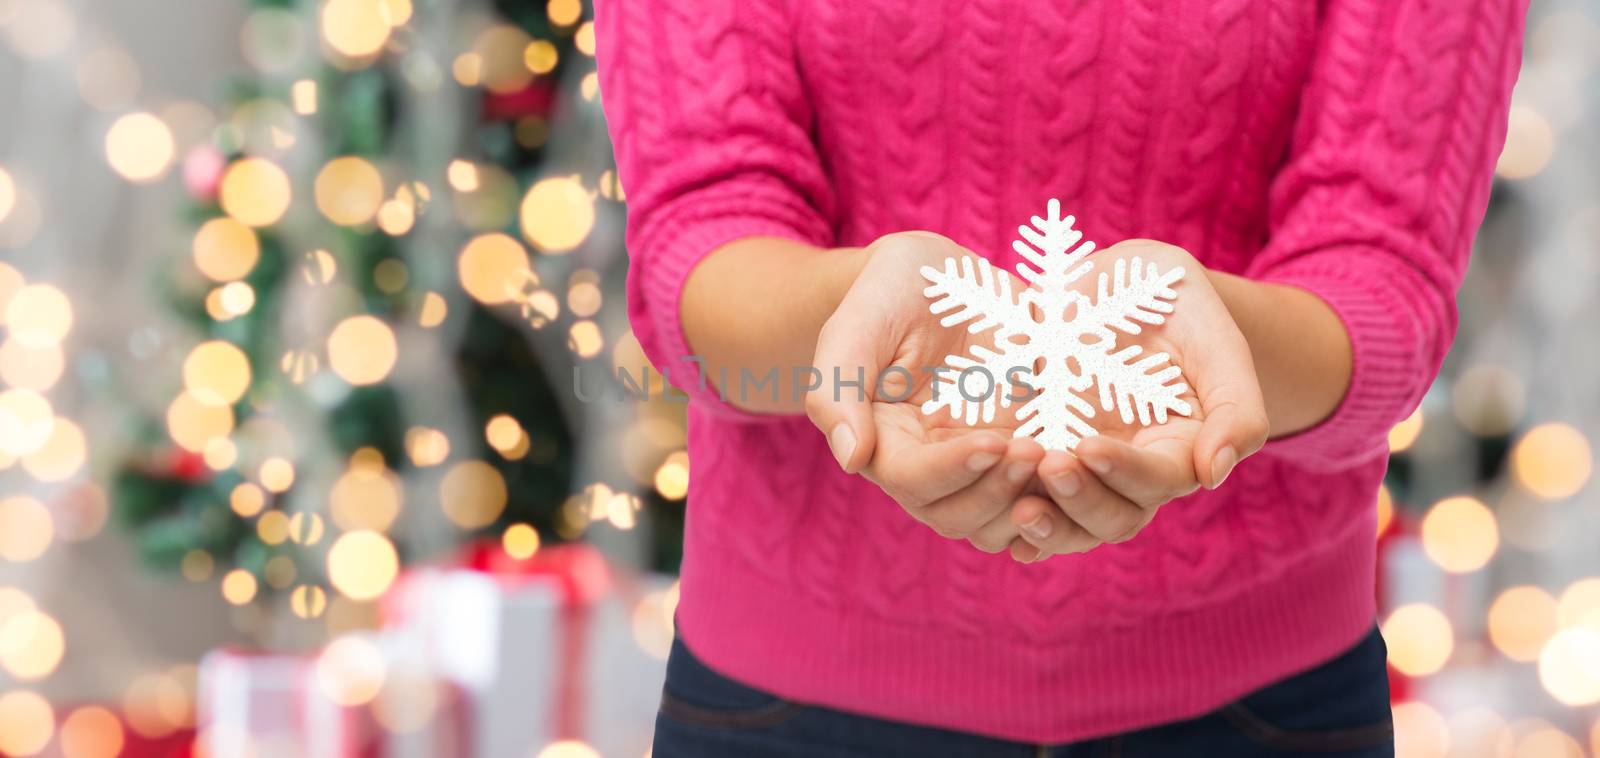 christmas, holidays and people concept - close up of woman in pink sweater holding snowflake decoration over tree lights background